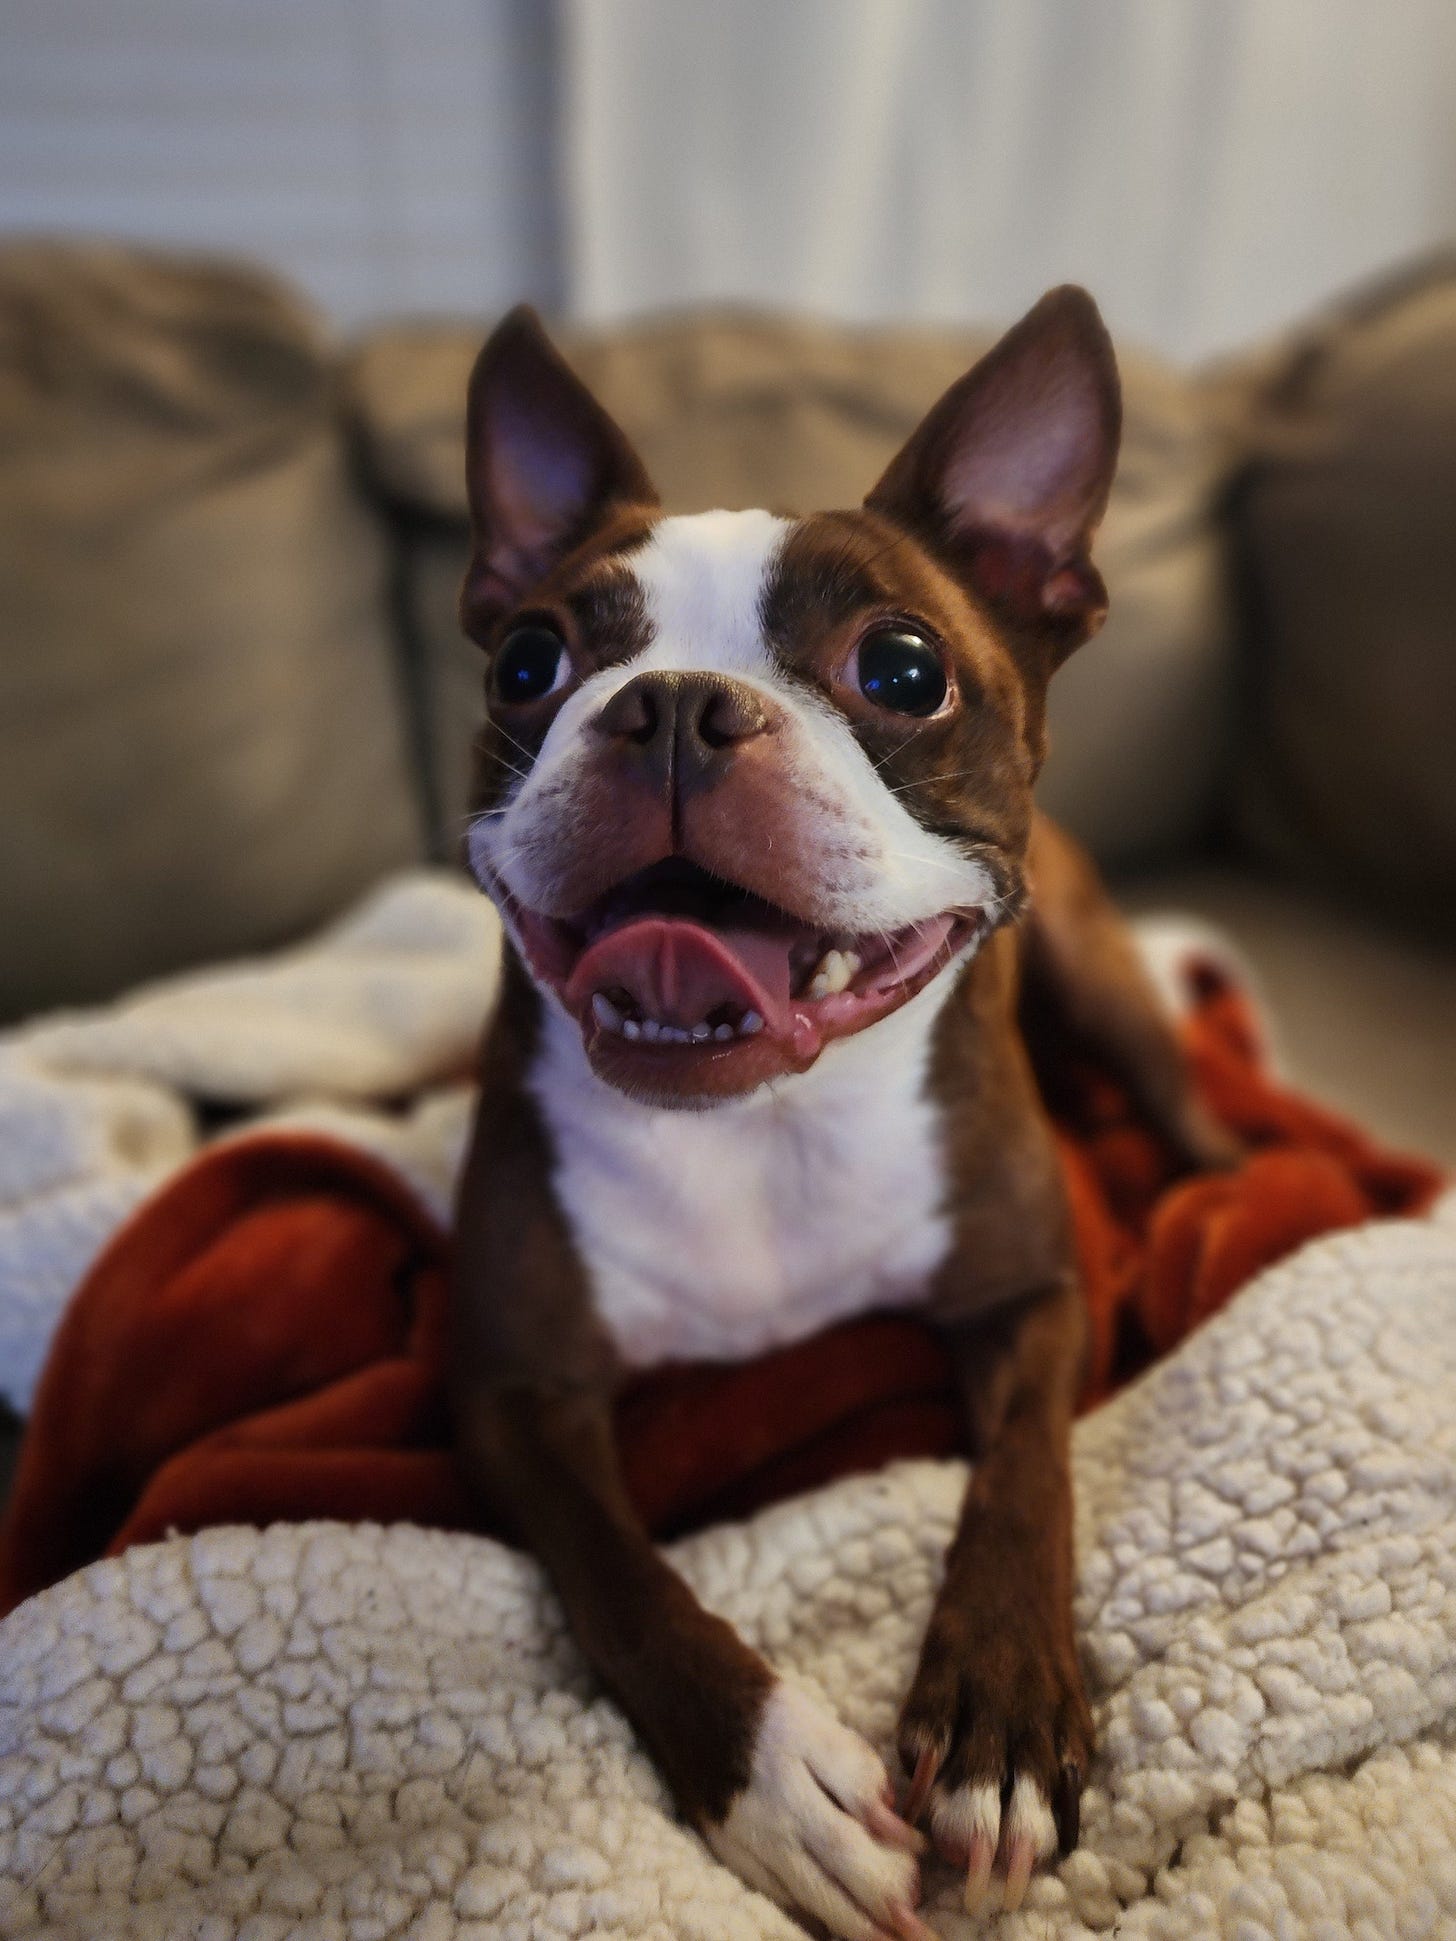 A small brown and white terrier looks up with her tongue hanging out of her mouth. She looks like she's smiling. She is lying on a burgundy and white fleece blanket on a brown suede couch.